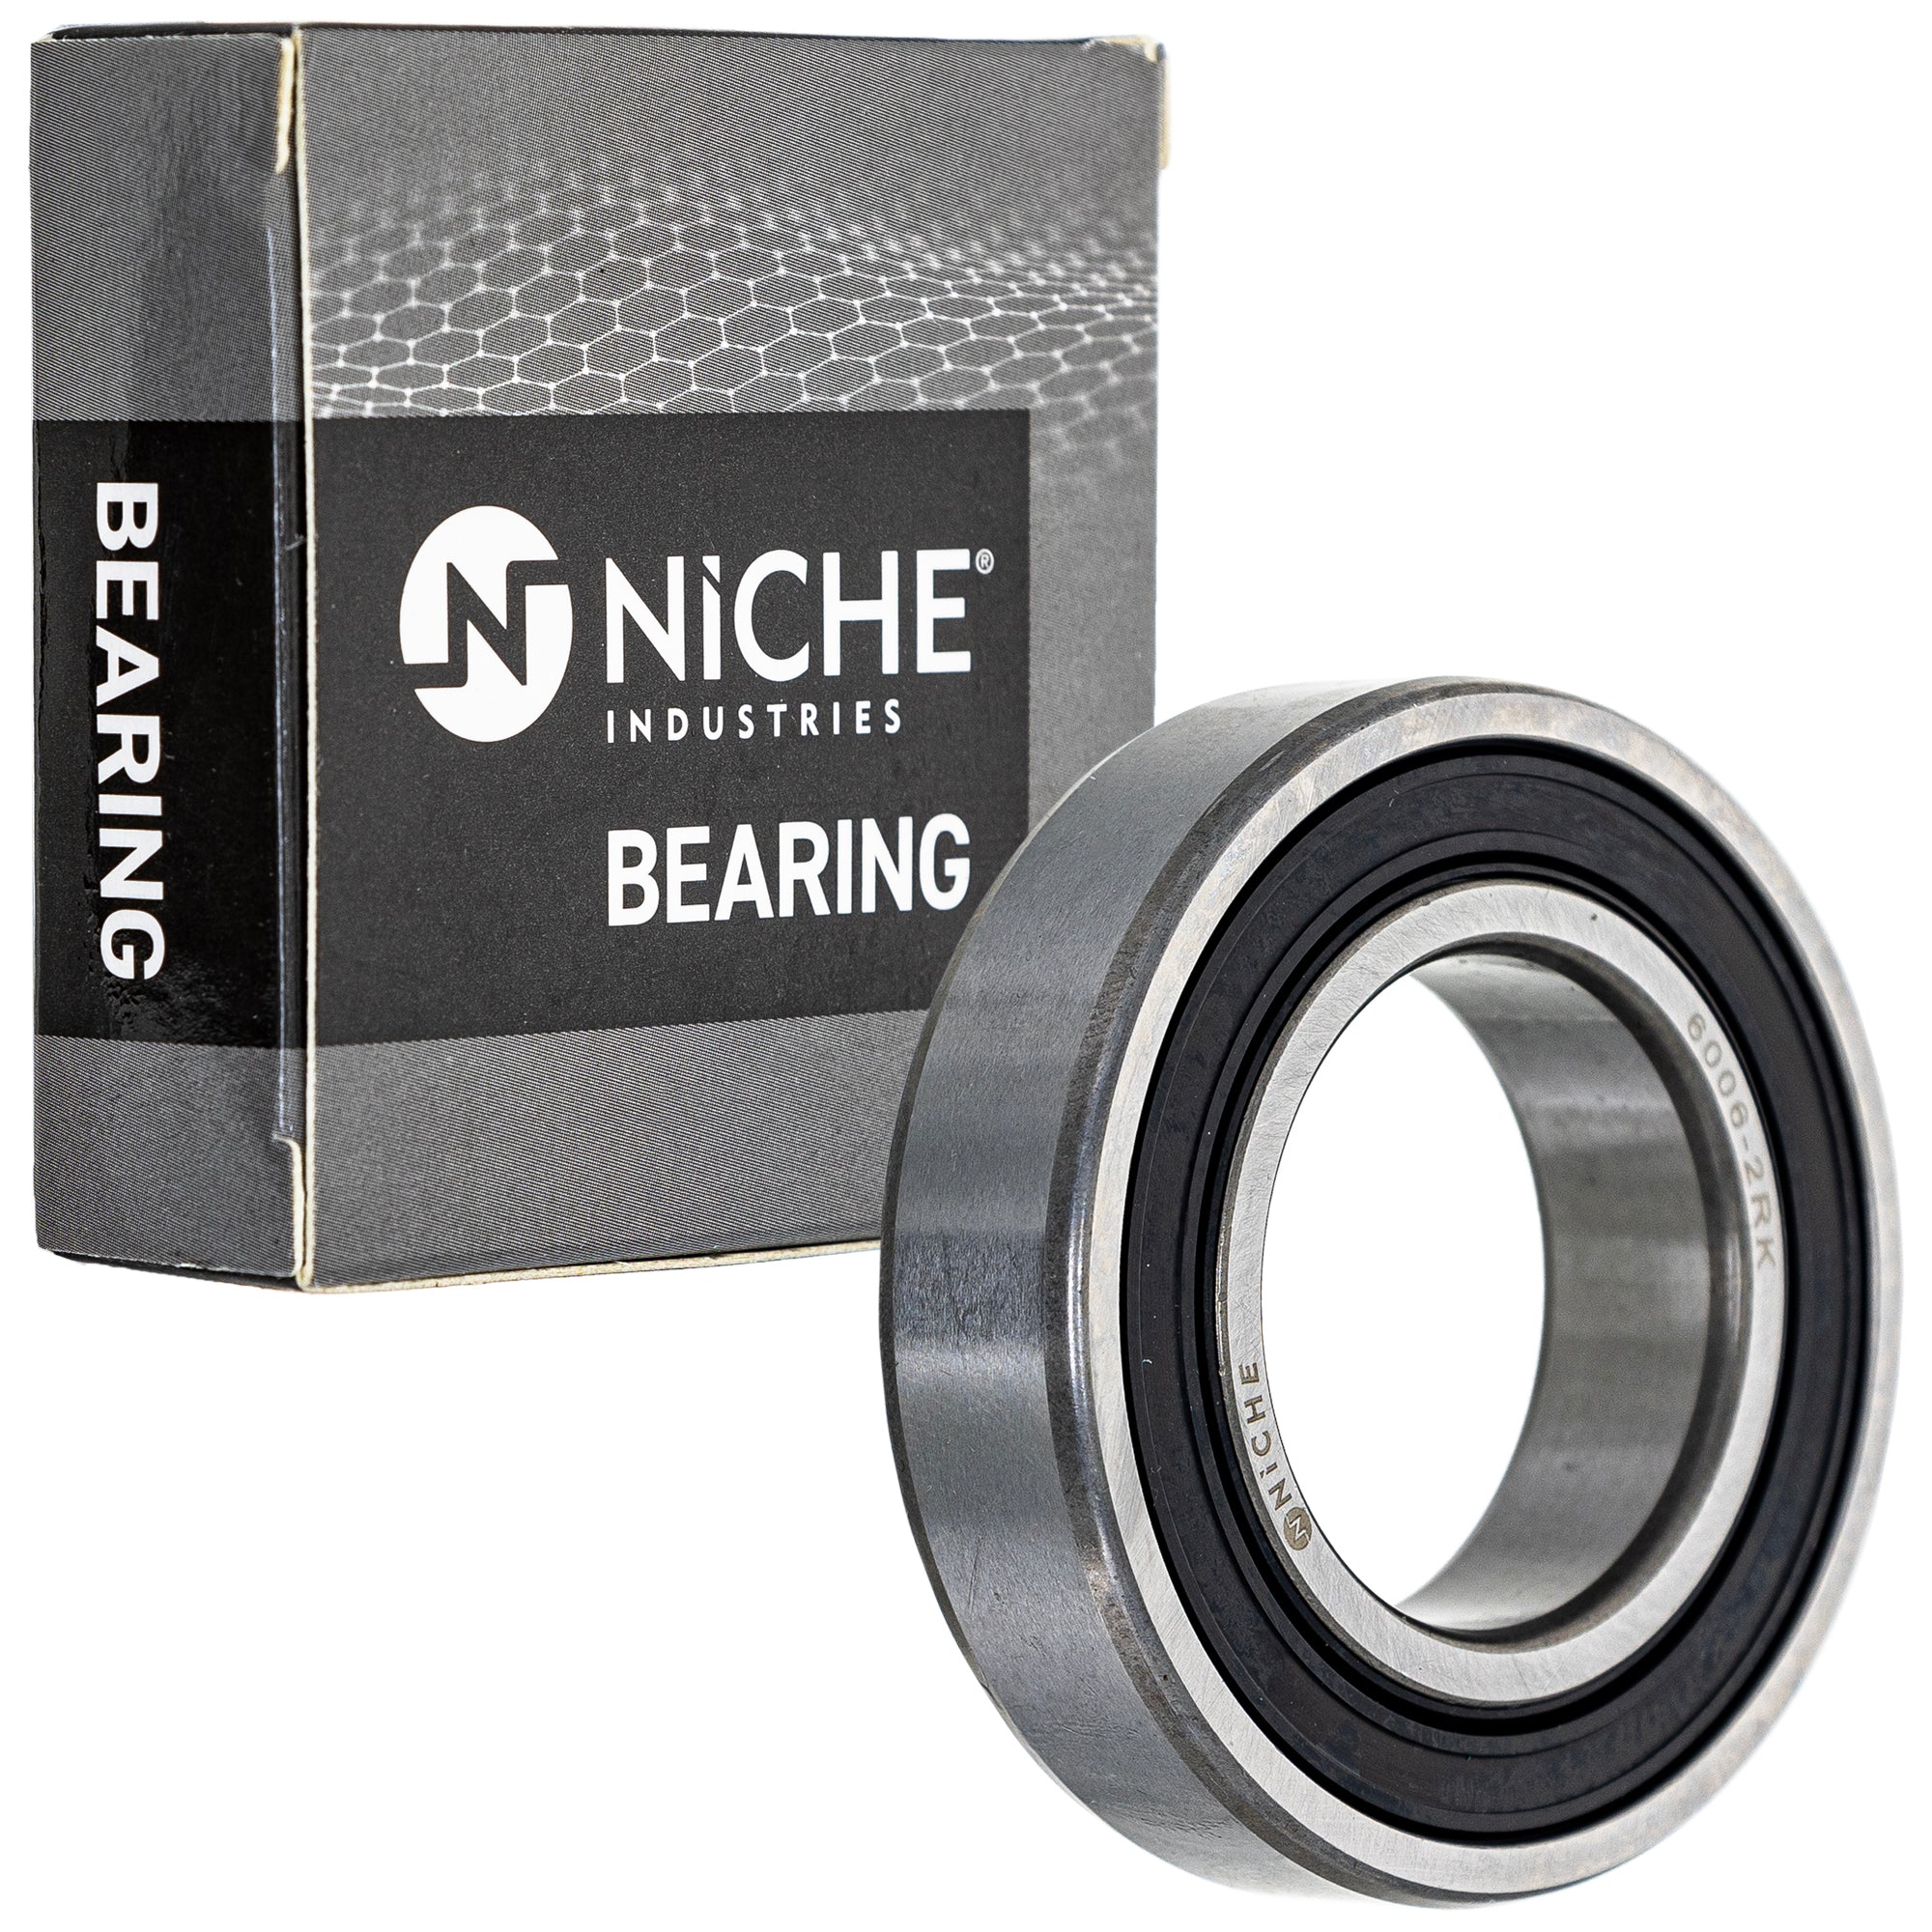 NICHE 519-CBB2218R Bearing 10-Pack for zOTHER Arctic Cat Textron